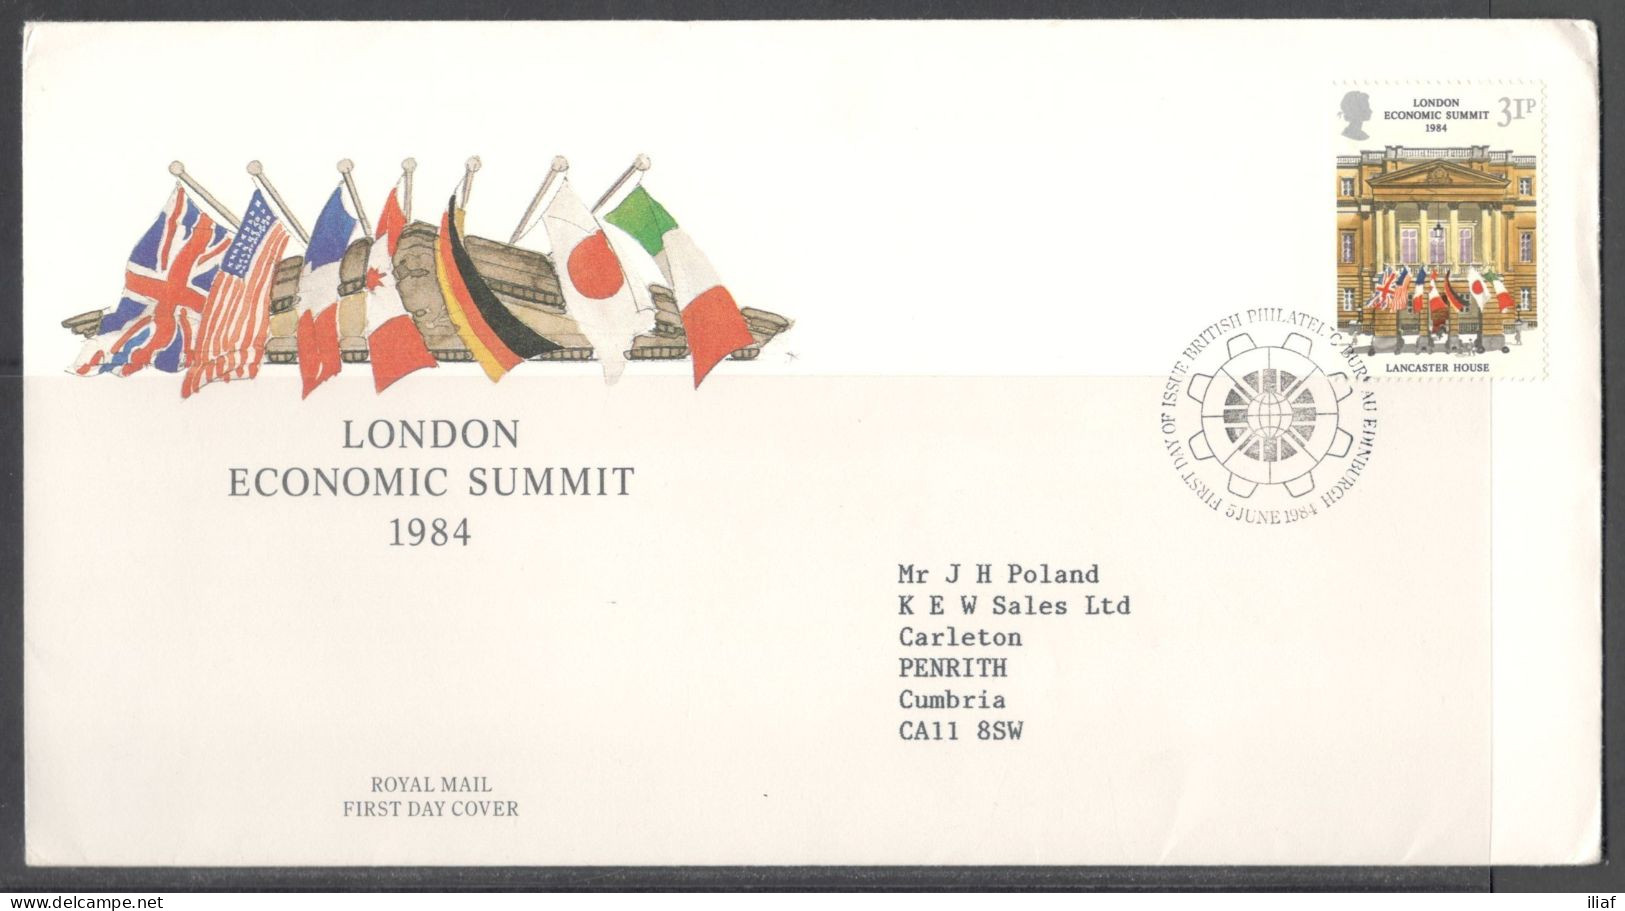 United Kingdom Of Great Britain.  FDC Sc. 1057.  London Economic Summit Conference. Lancaster House  FDC Cancellation - 1981-1990 Decimal Issues